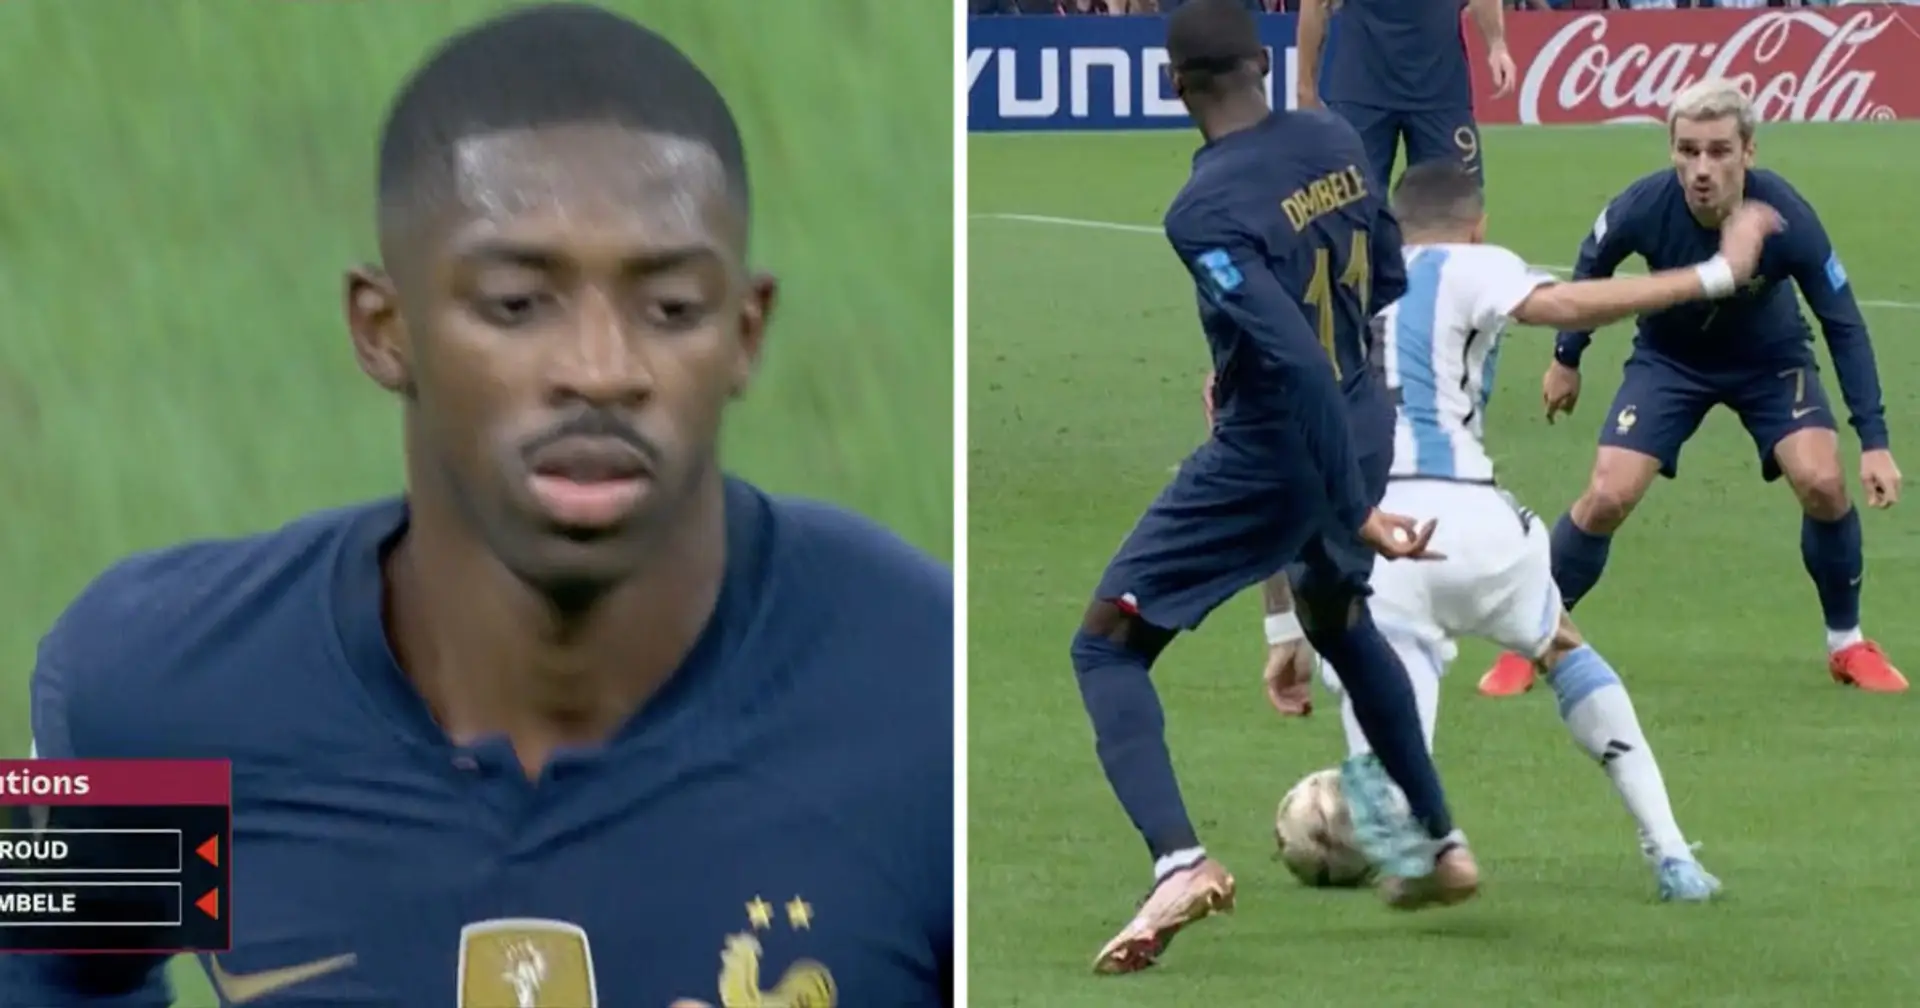 Dembele subbed off before half-time in World Cup final, his foul led to Messi's goal